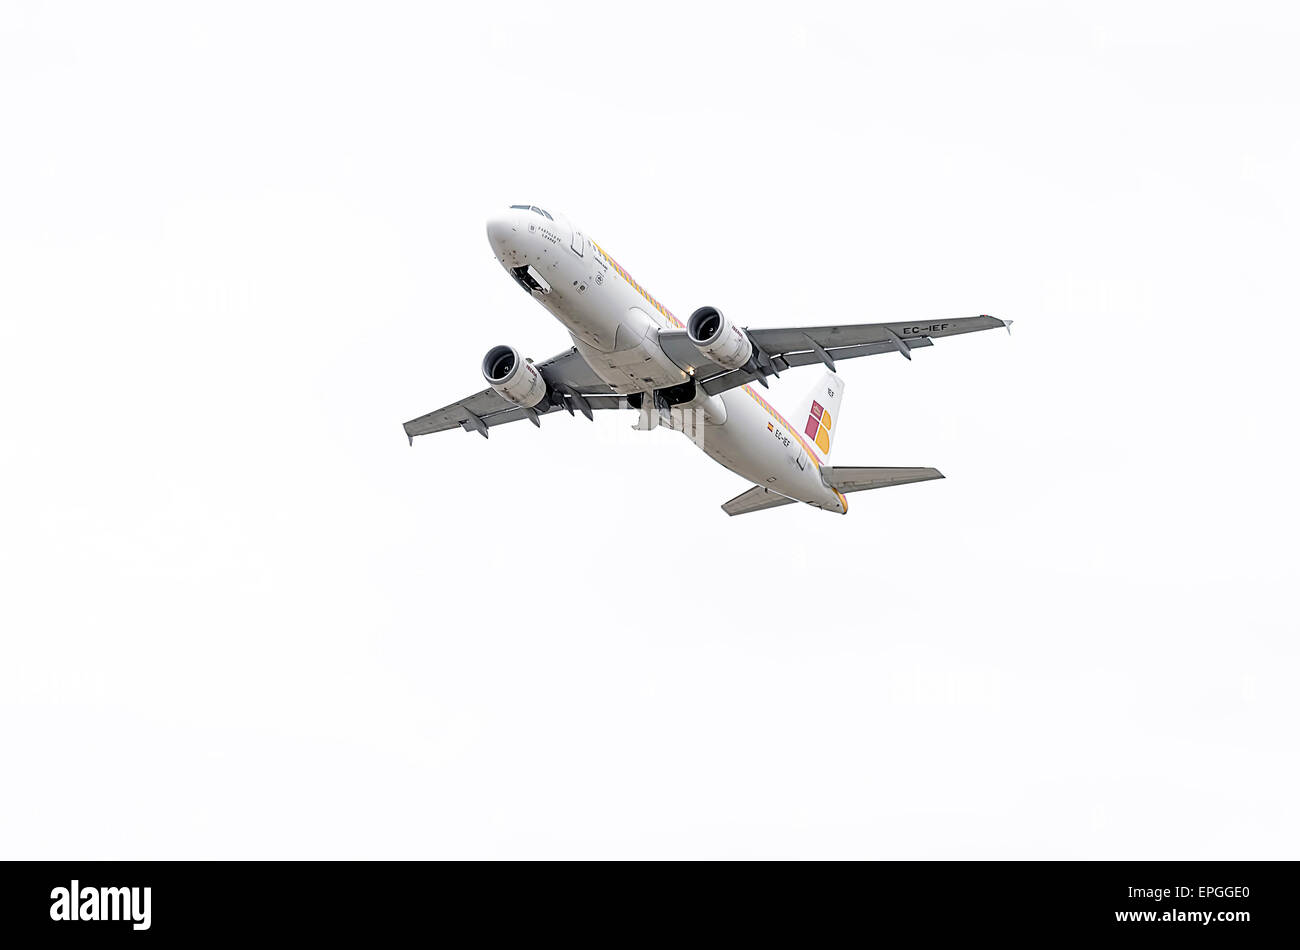 Aircraft -Airbus A320-, of -Iberia- airline, is taking off from Madrid-Barajas -Adolfo Suarez- airport. Stock Photo